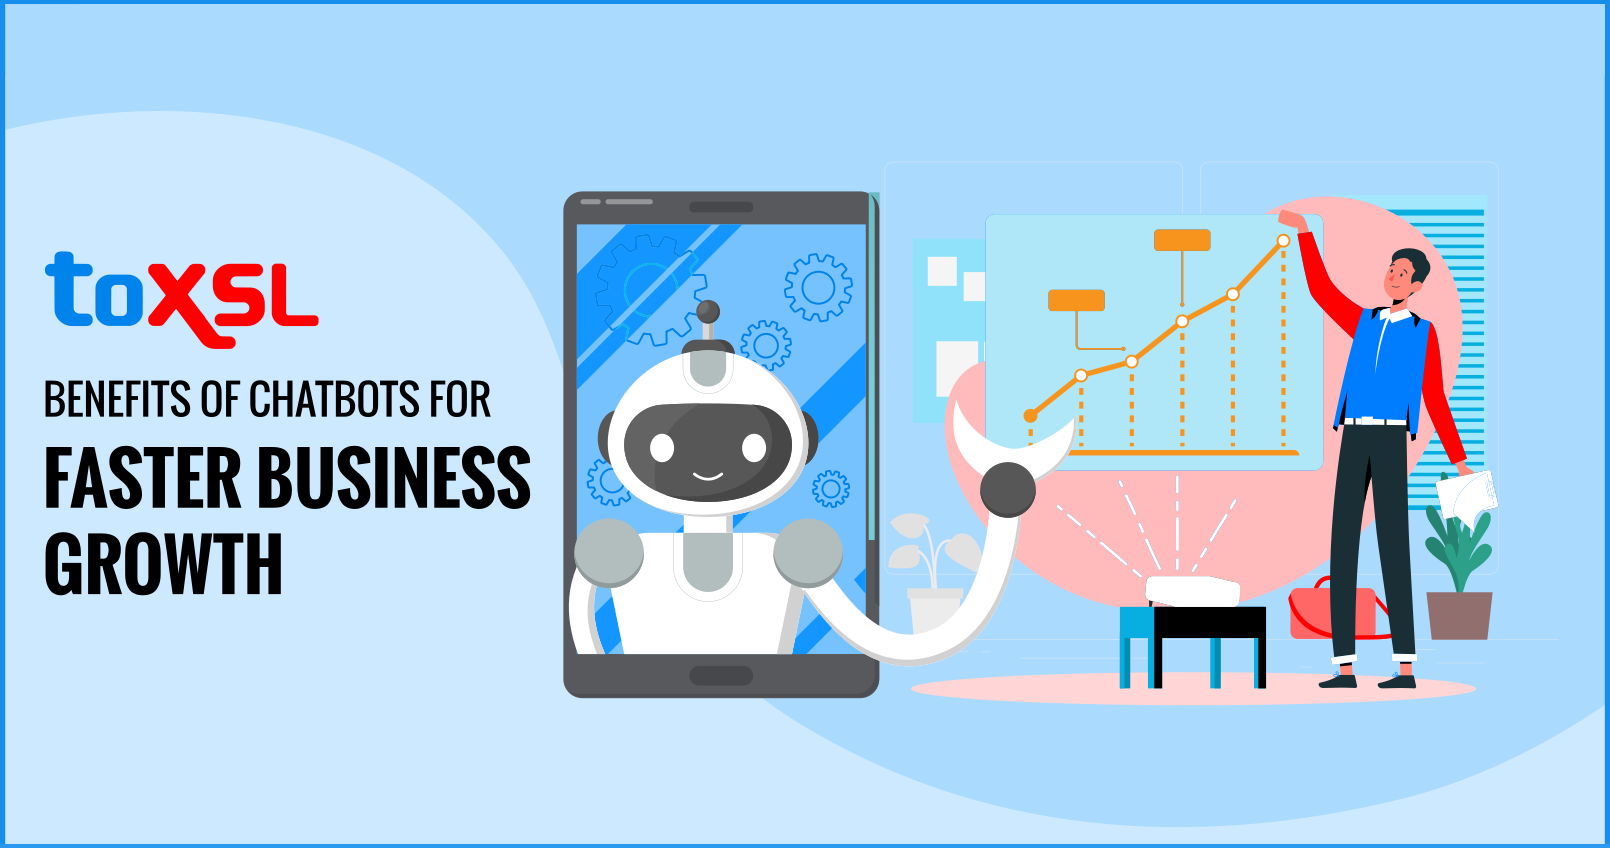 BENEFITS OF CHATBOTS FOR FASTER BUSINESS GROWTH